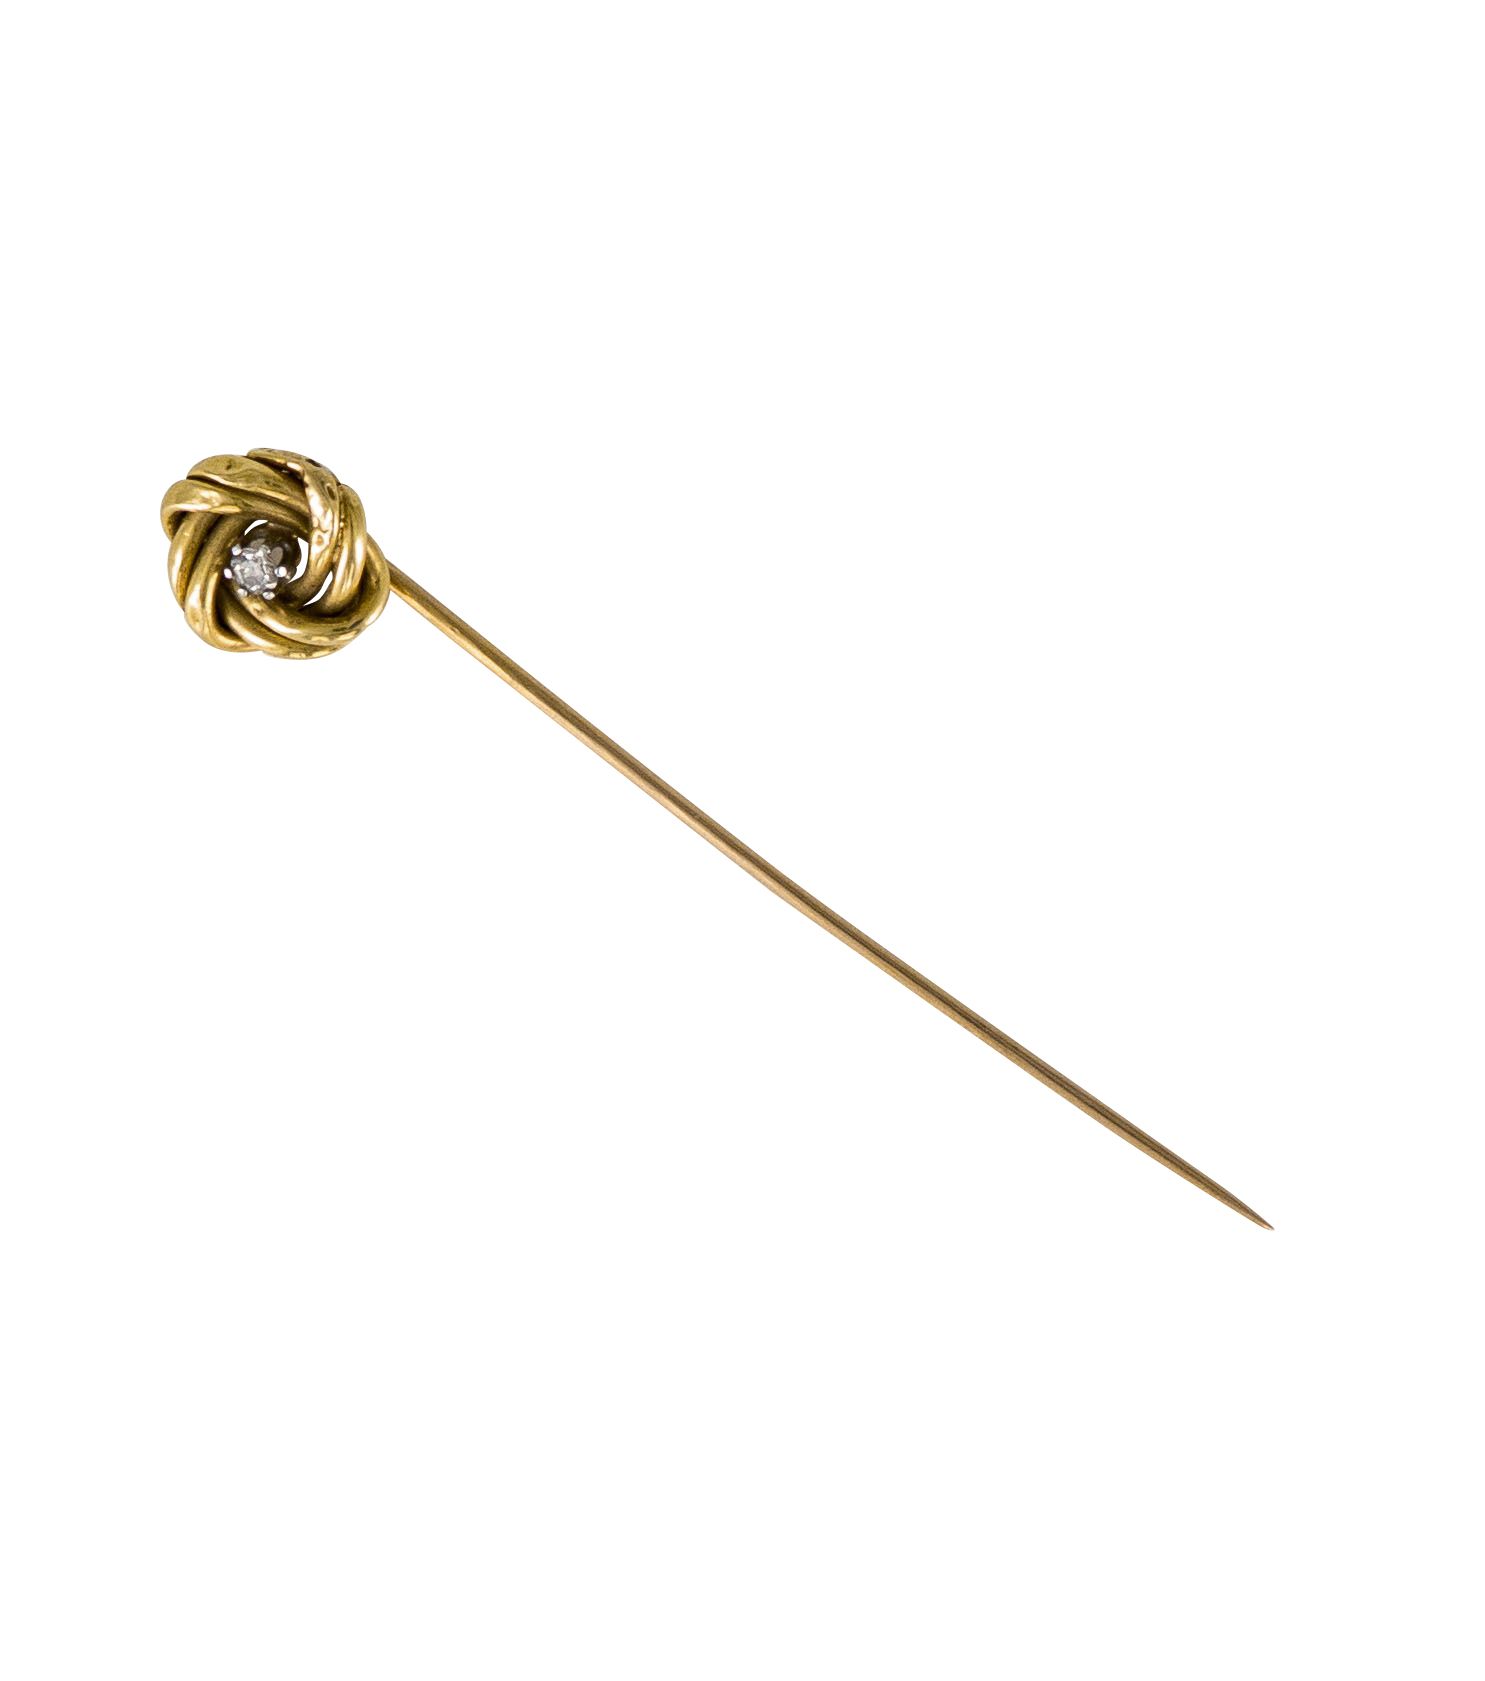 Null 18K (750) gold lapel pin with an Algerian love knot set with a round old cu&hellip;